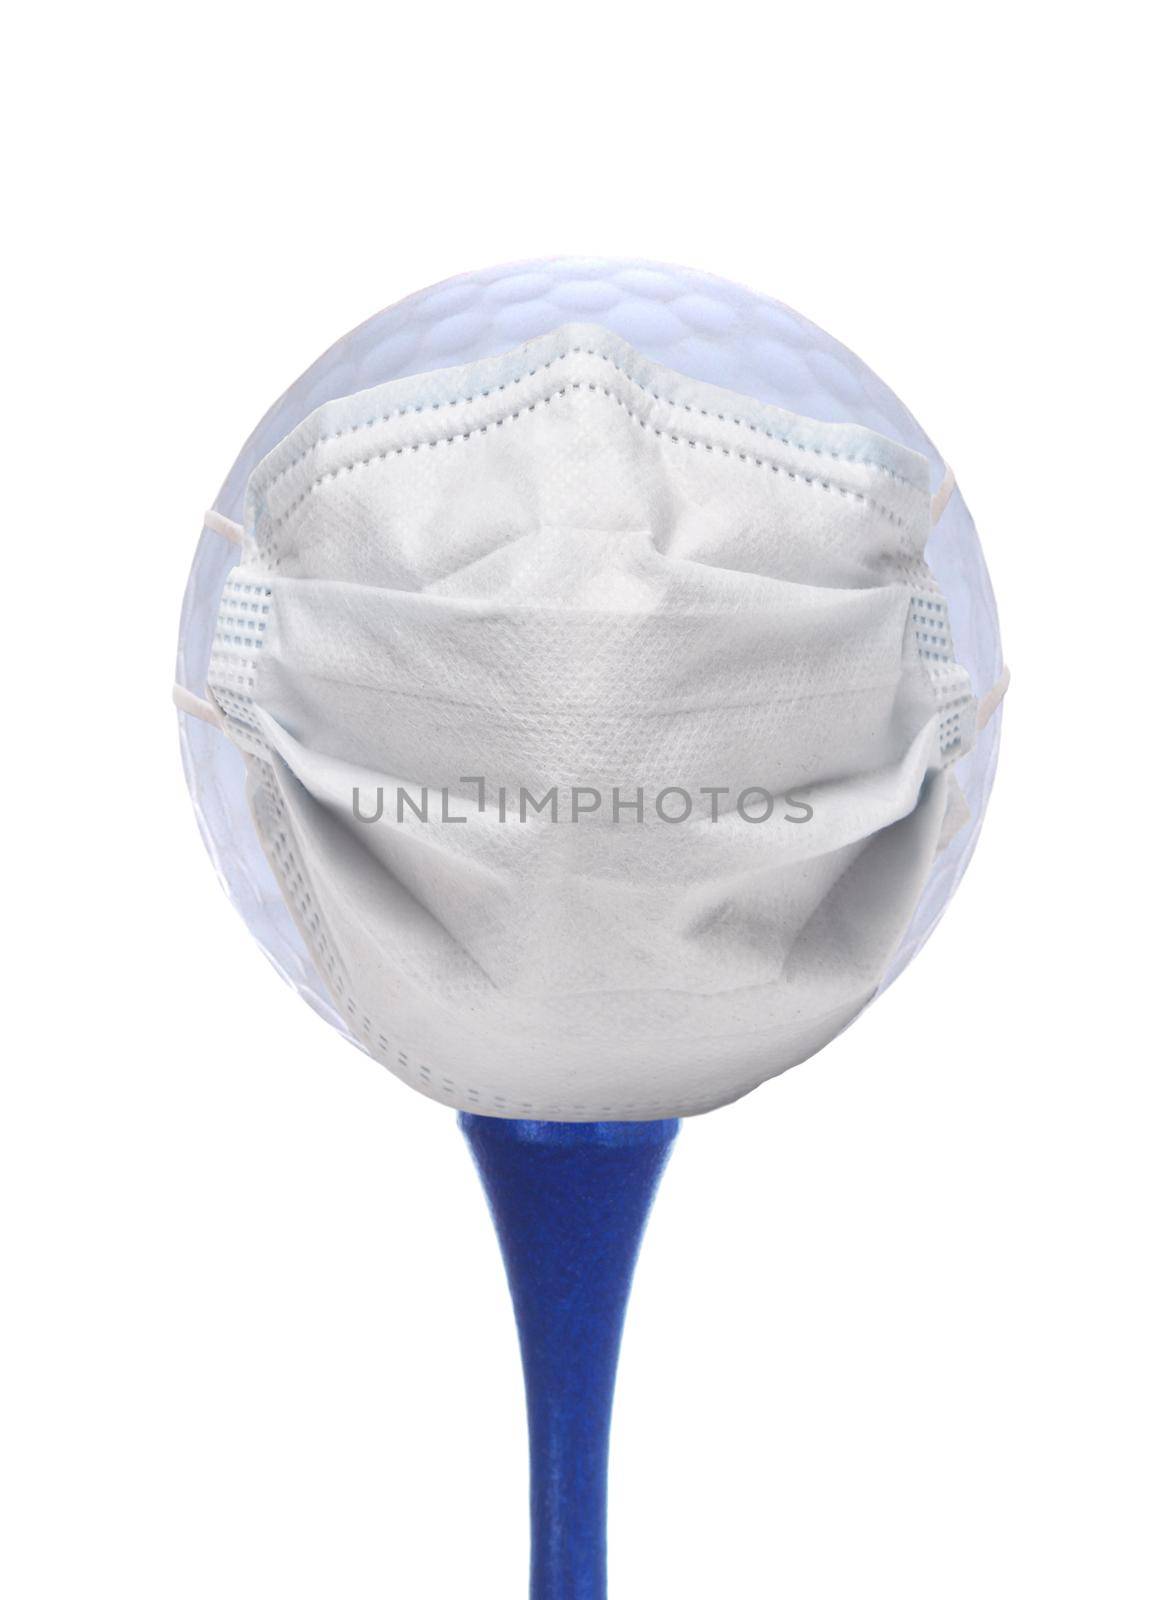 Sports and COVID-19 Concept- A Golf Ball with Surgical Mask on ablue tee isolated over white